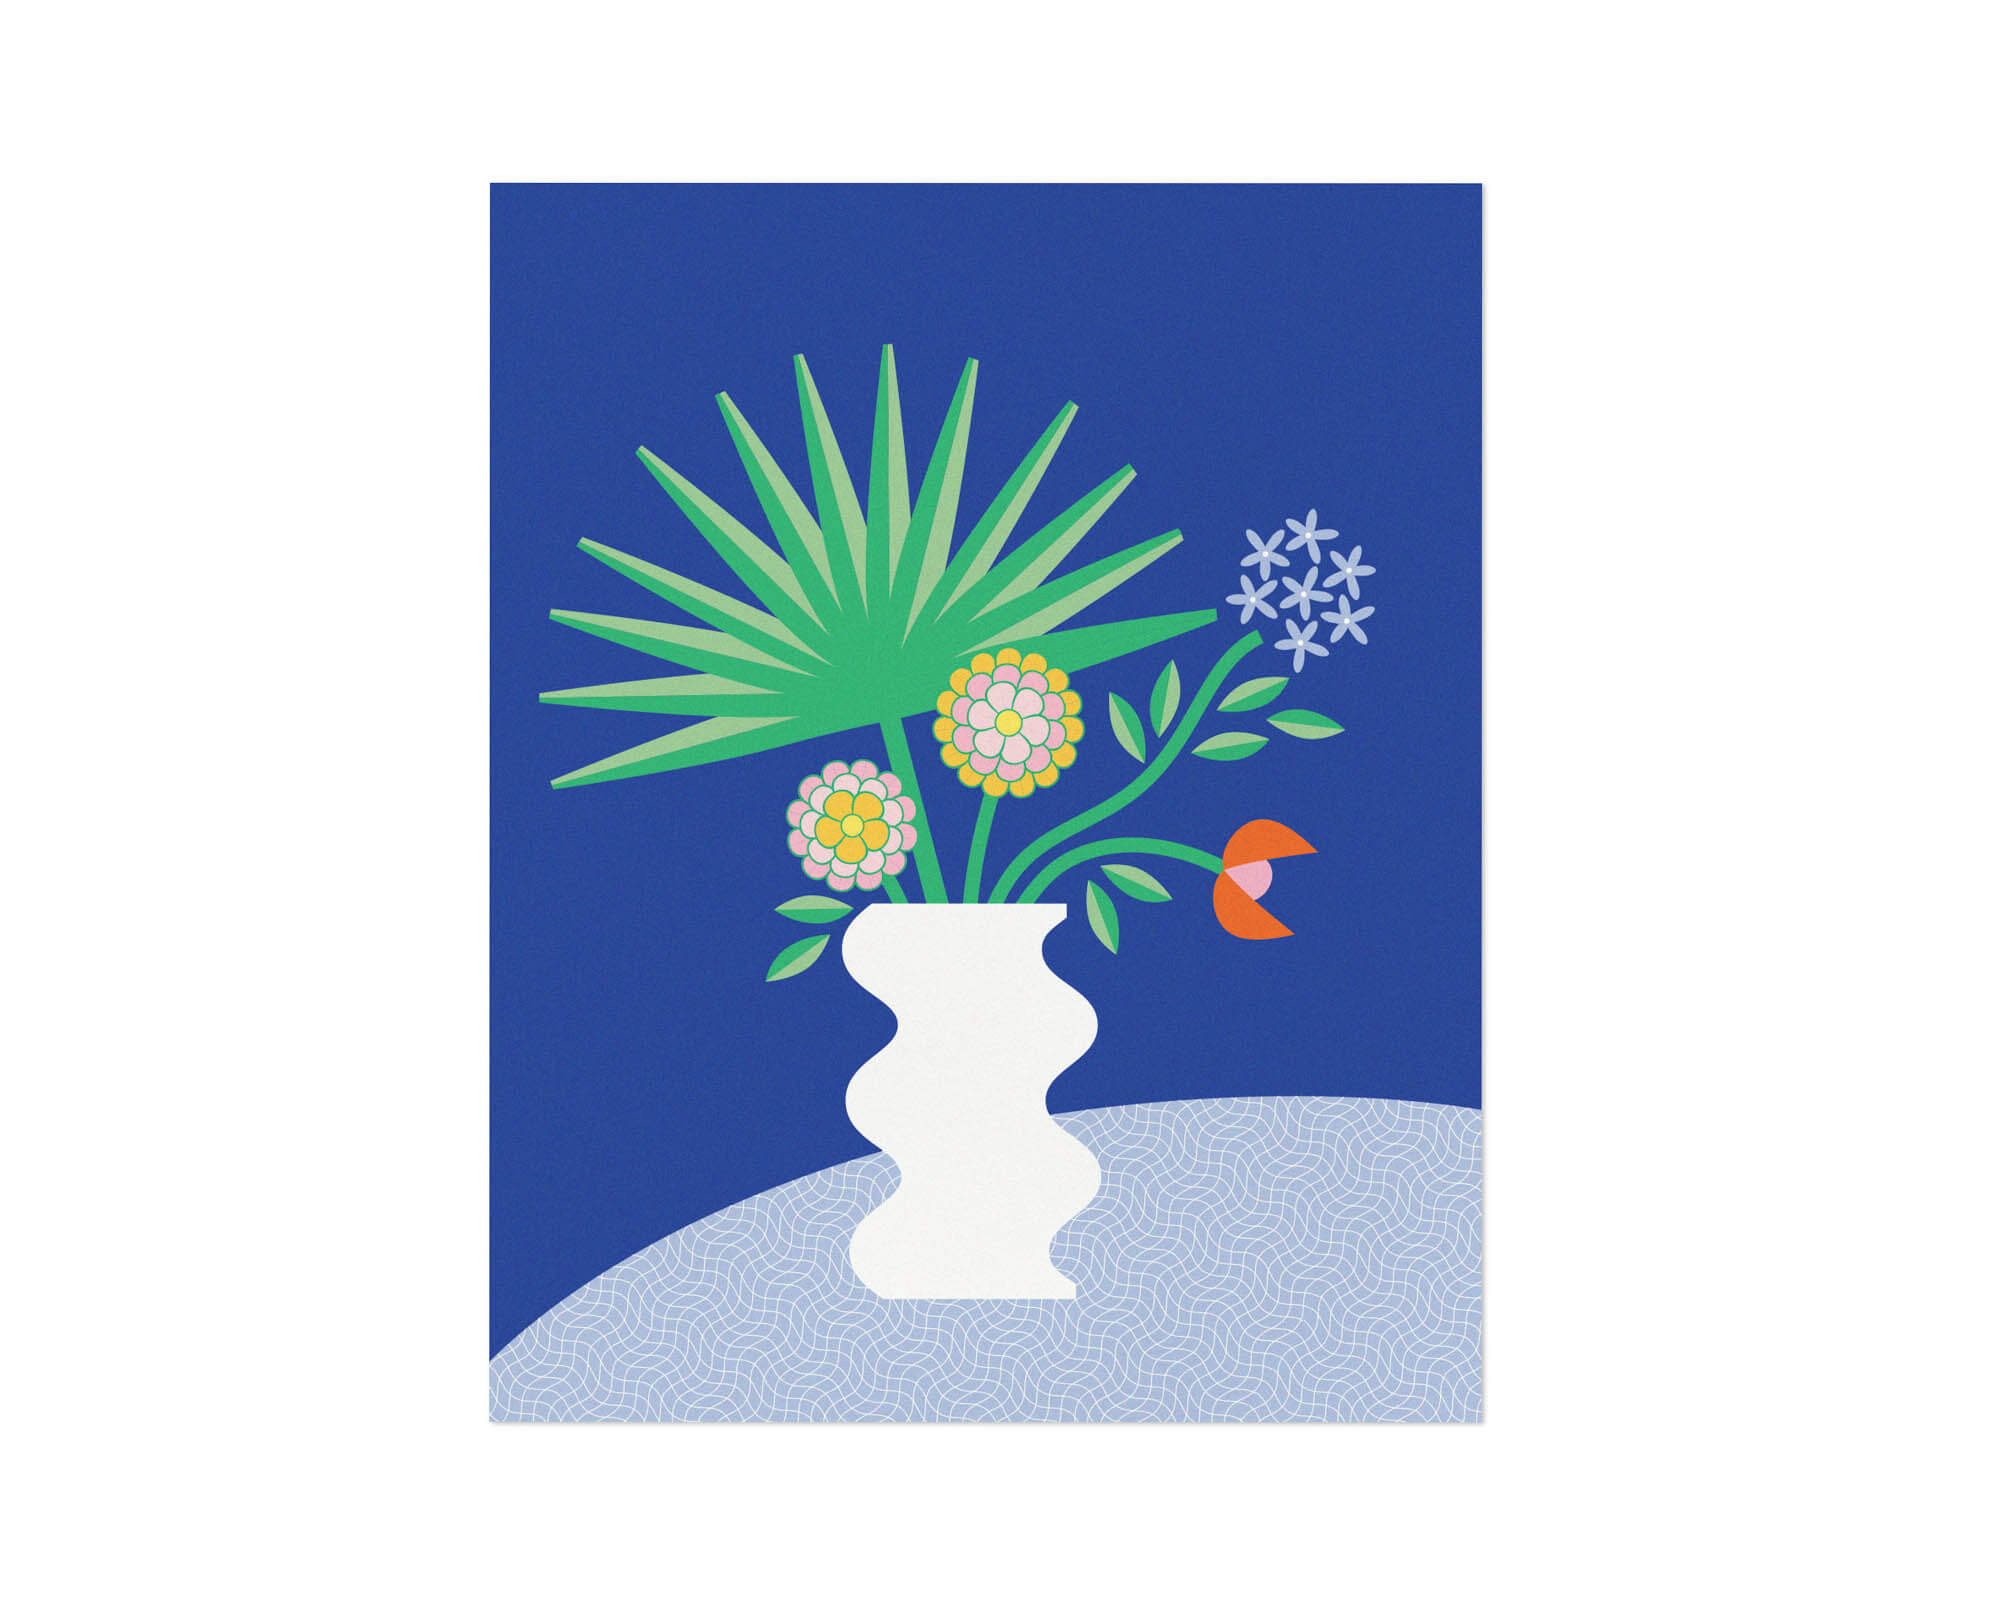 "Home Chic Home" contemporary wavy vase illustration with unusual tropical flowers and foliage. Graphic, bold blue flower poster with vaguely mid-century inspired art and a nod to Palms Springs. Made in USA by My Darlin' @mydarlin_bk